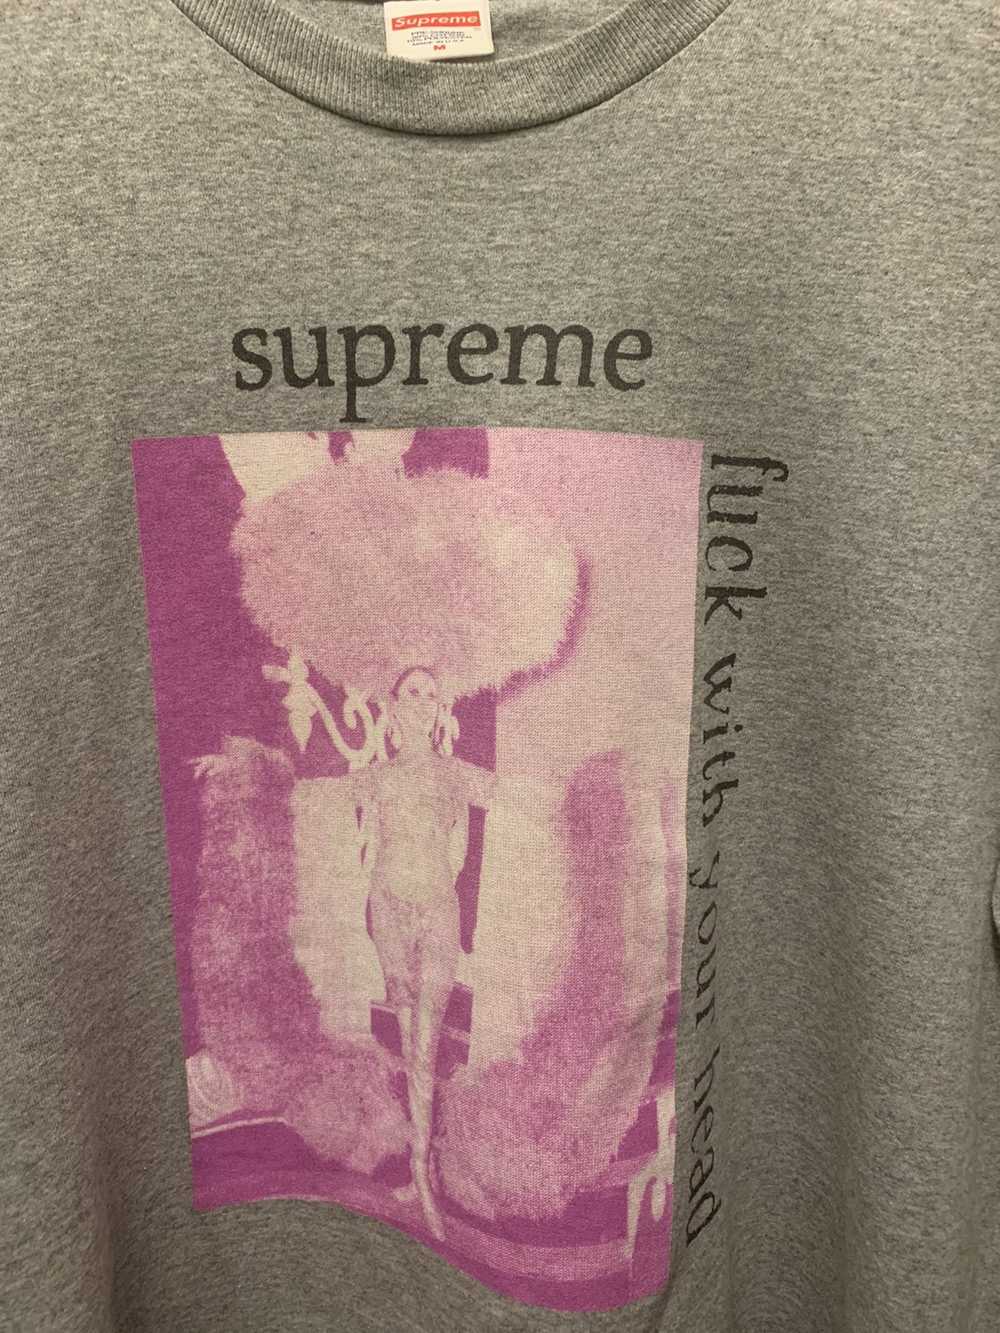 Supreme Fuck With Your Head Tee - image 1